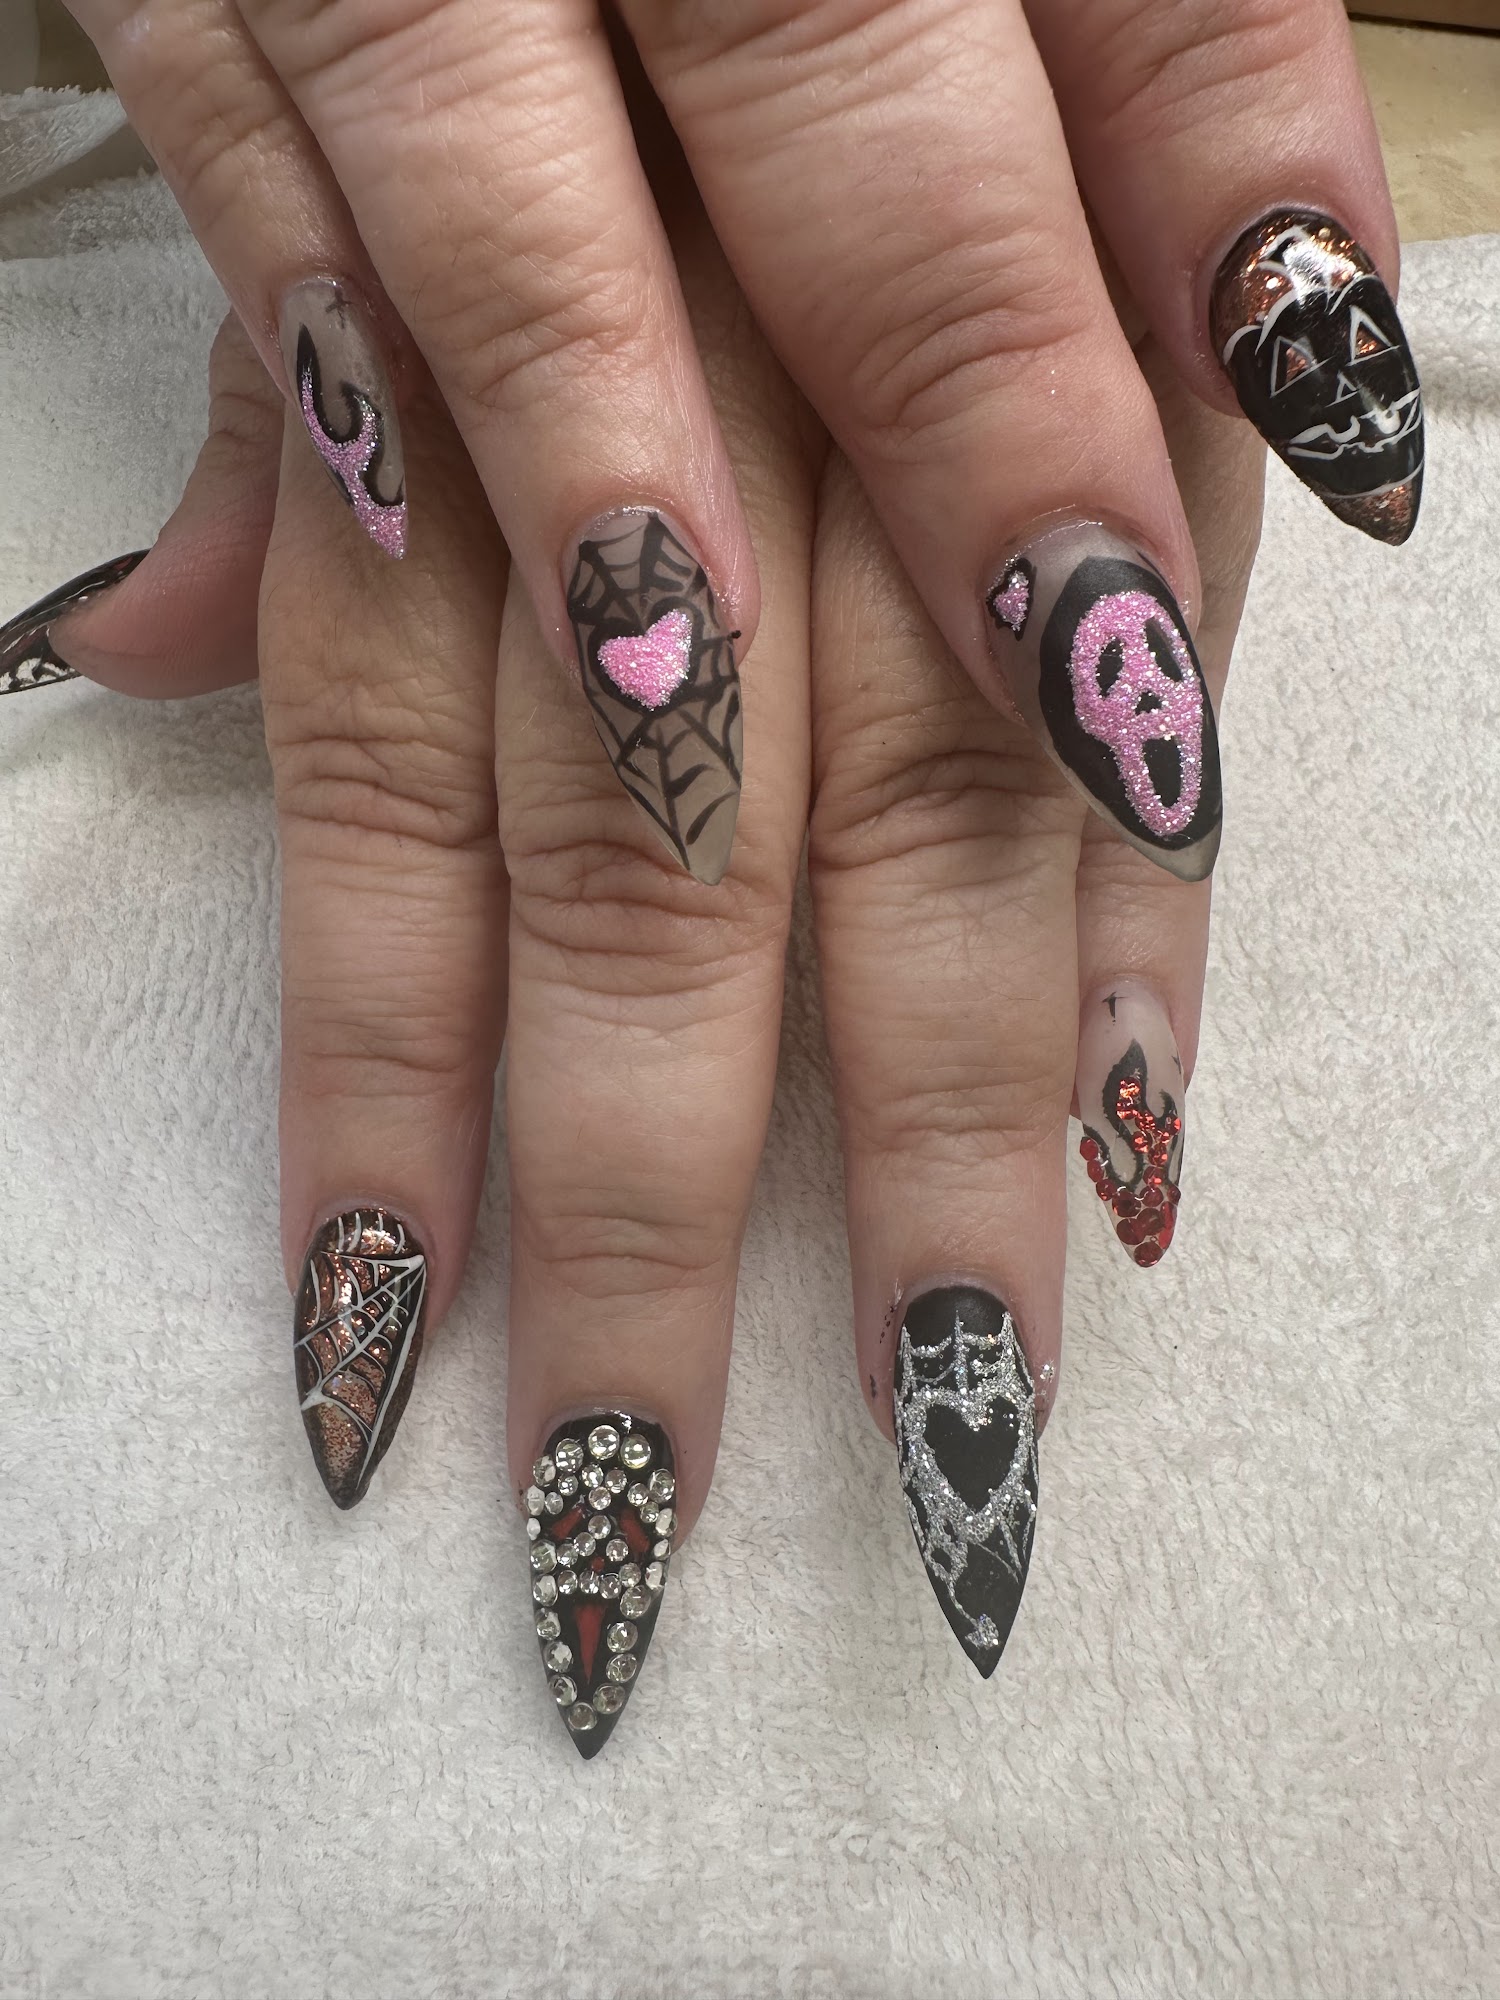 Be Licious Nails 849 W Bay Ave, Barnegat New Jersey 08005